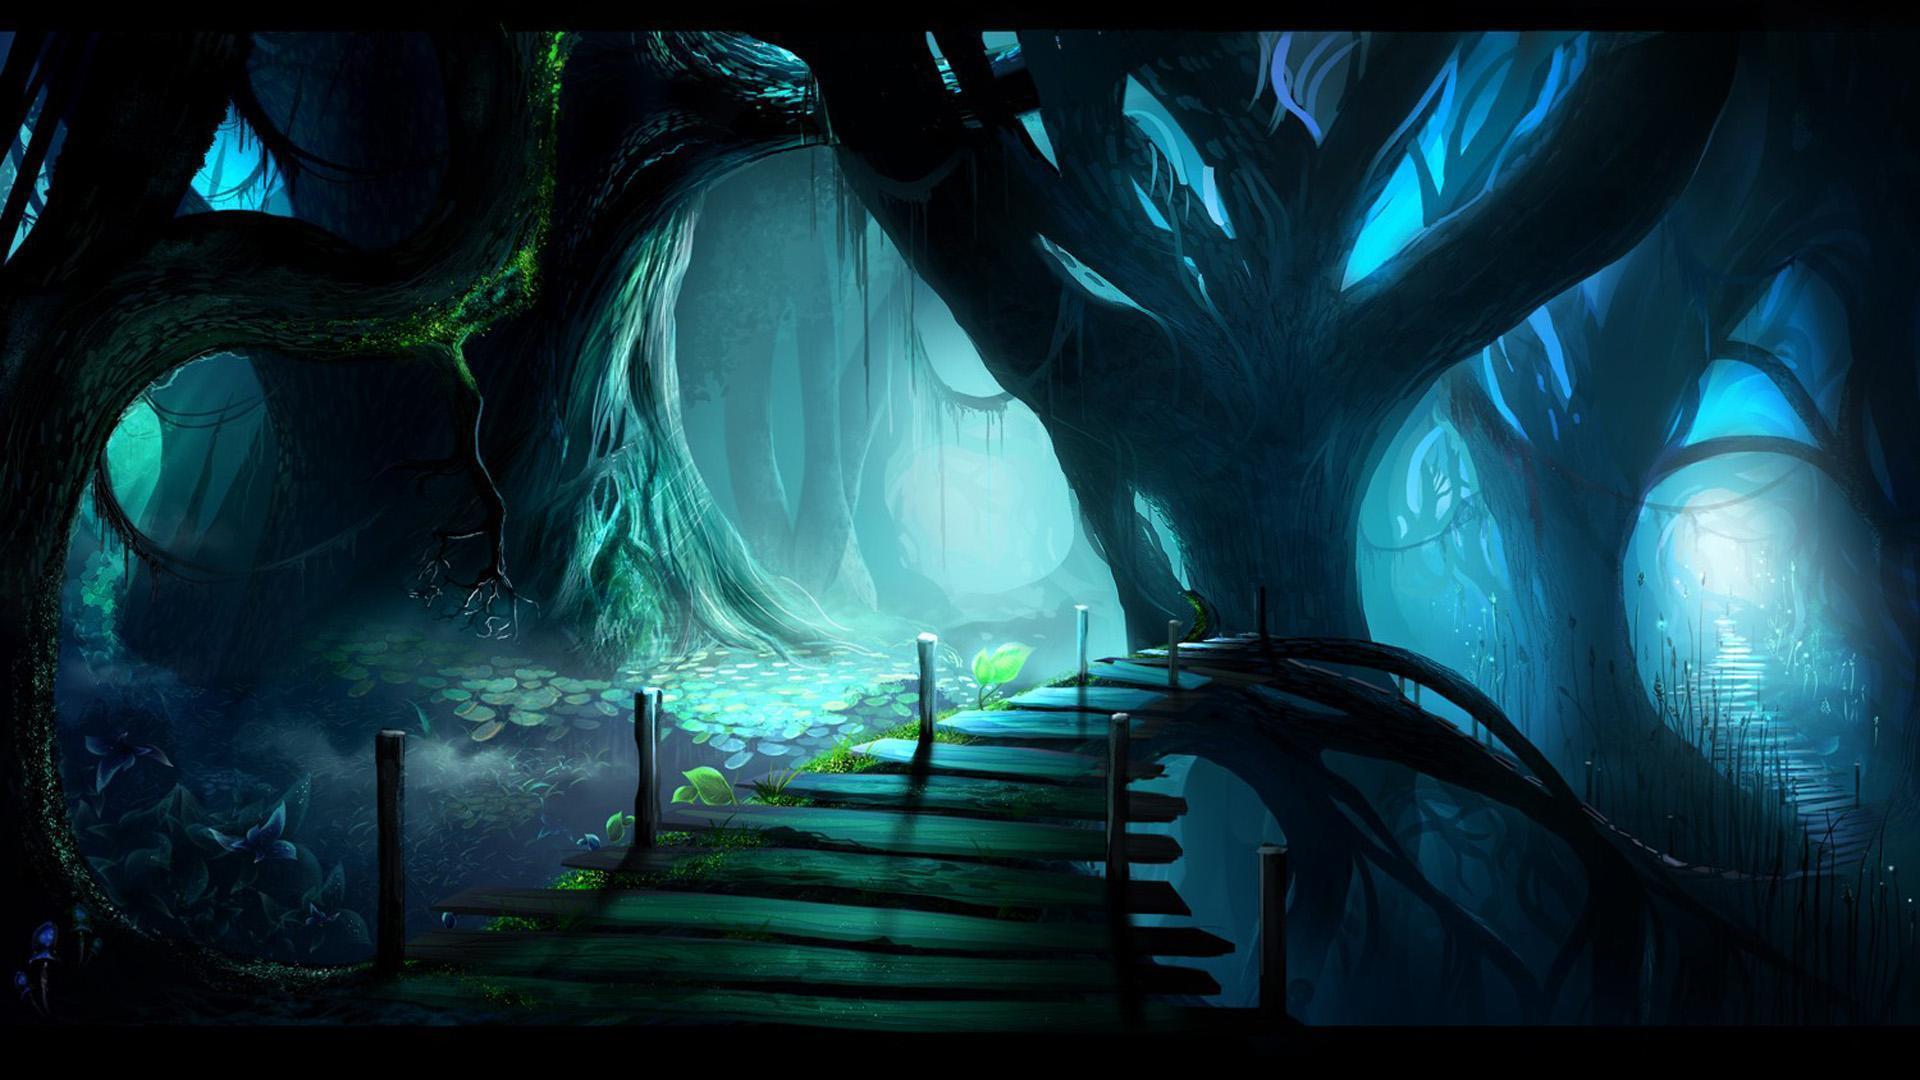 The night forest scenery Desktop background image 1920x1080 1080p